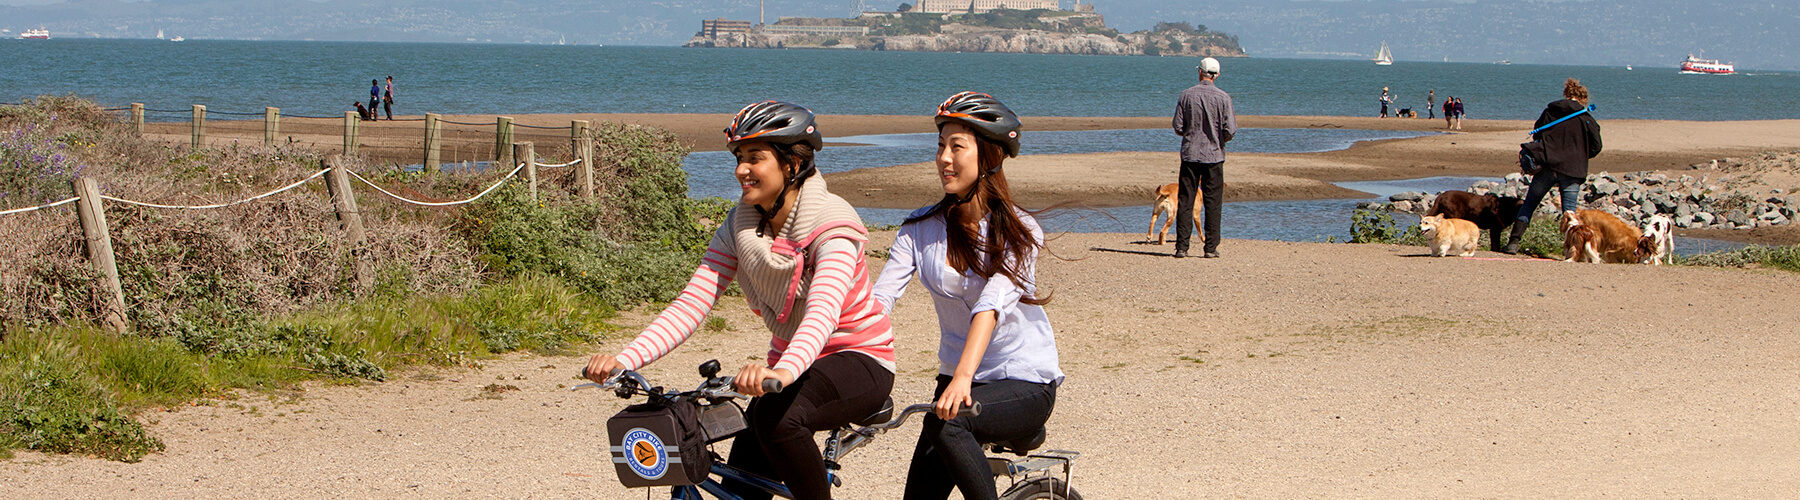 two girls riding tandem on the alcatraz tour san francisco activities